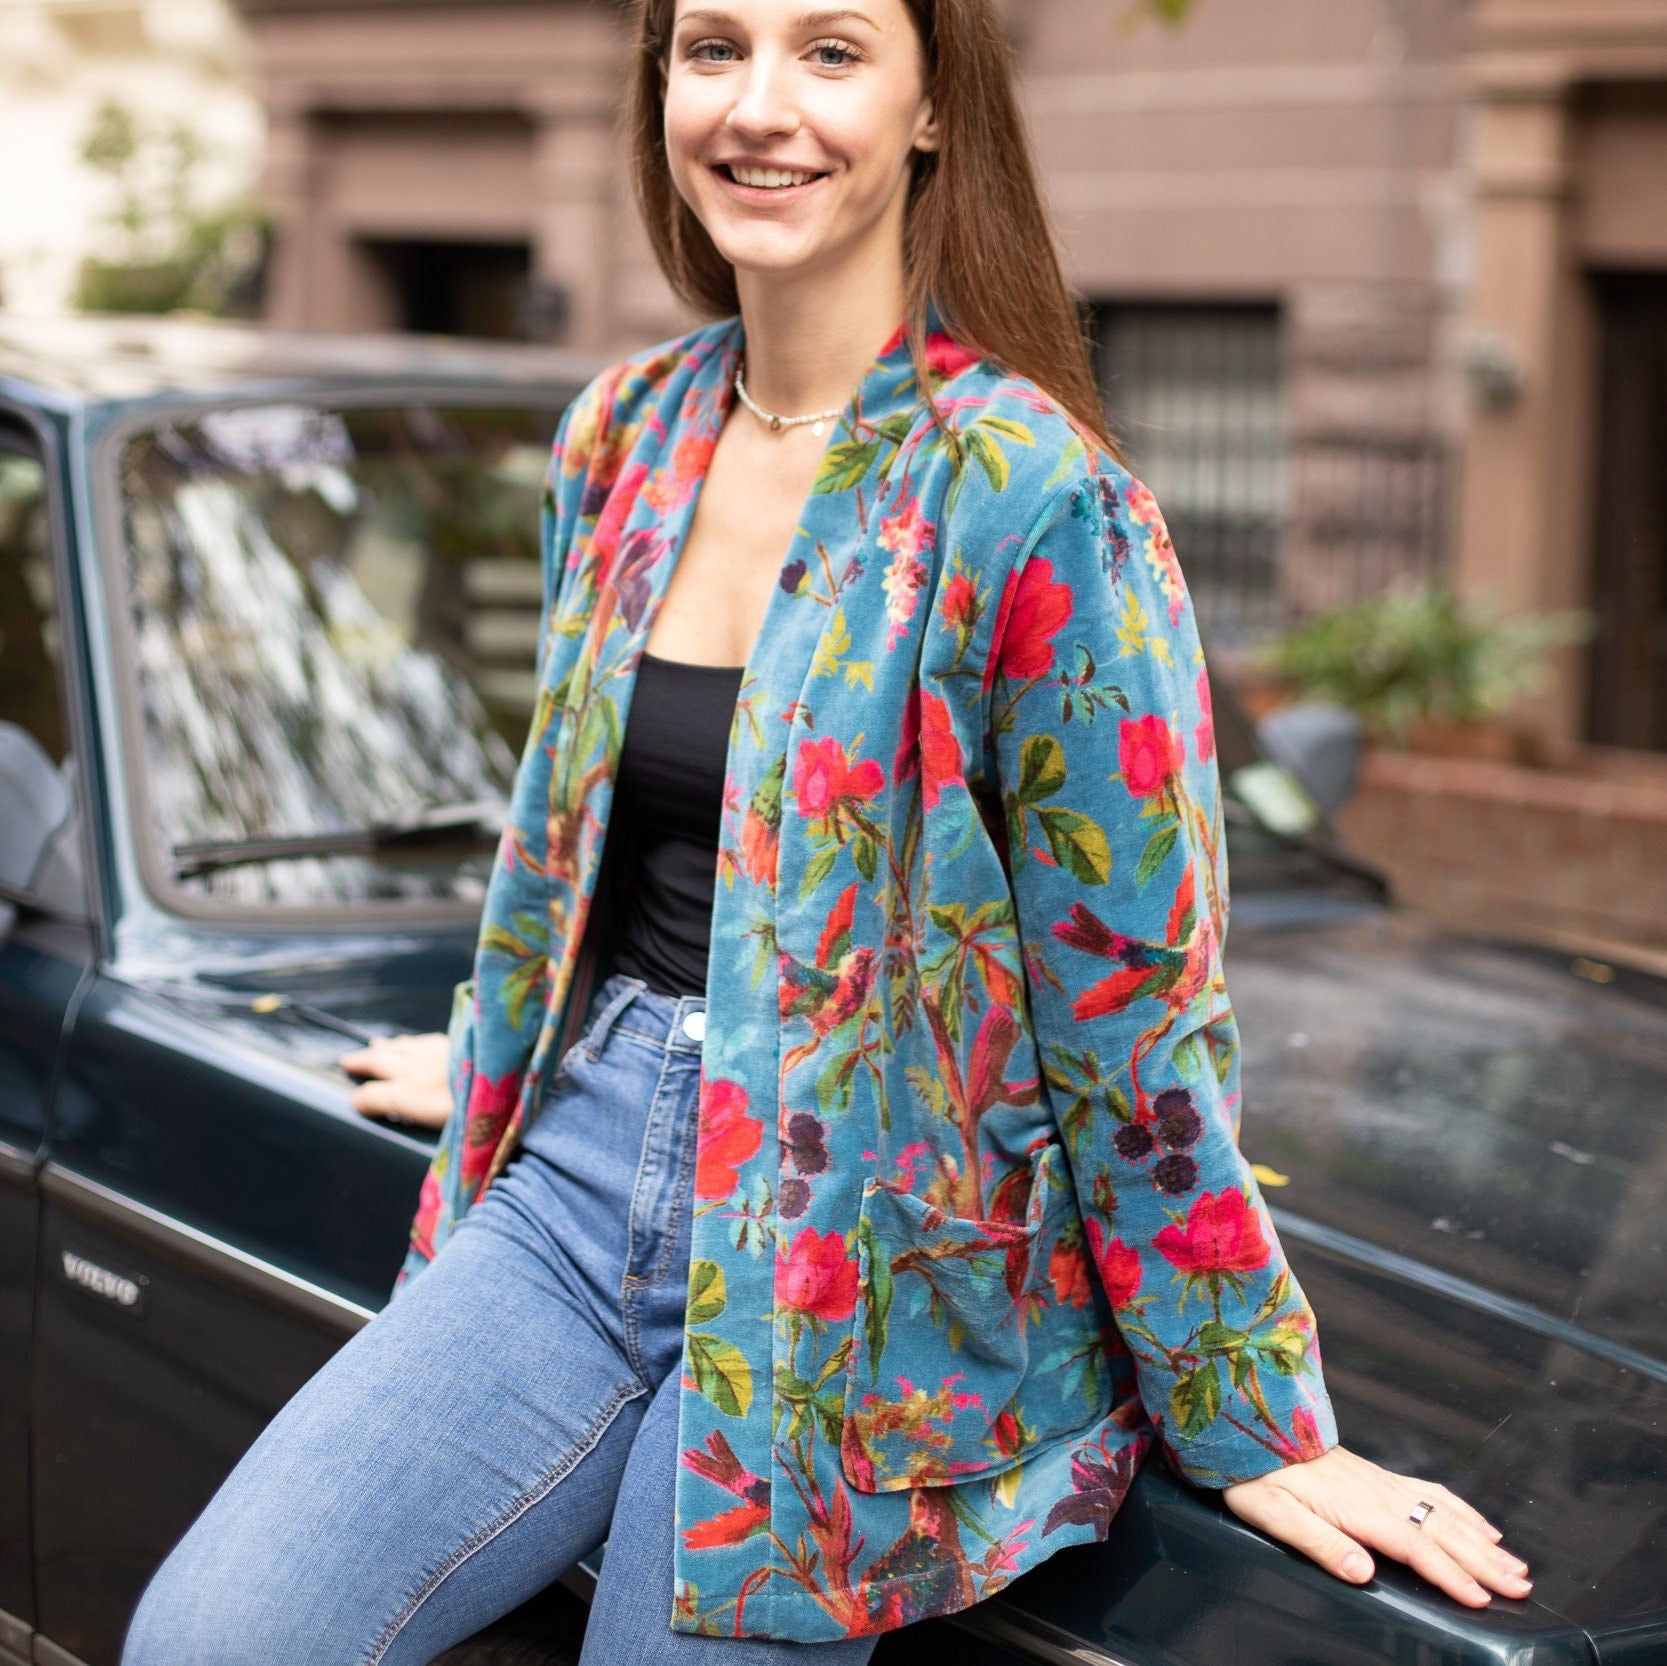 Model leaning on the car while adorned in the Japanese-Inspired Velvet Kimono Cardigan with Bird Print Short Jacket